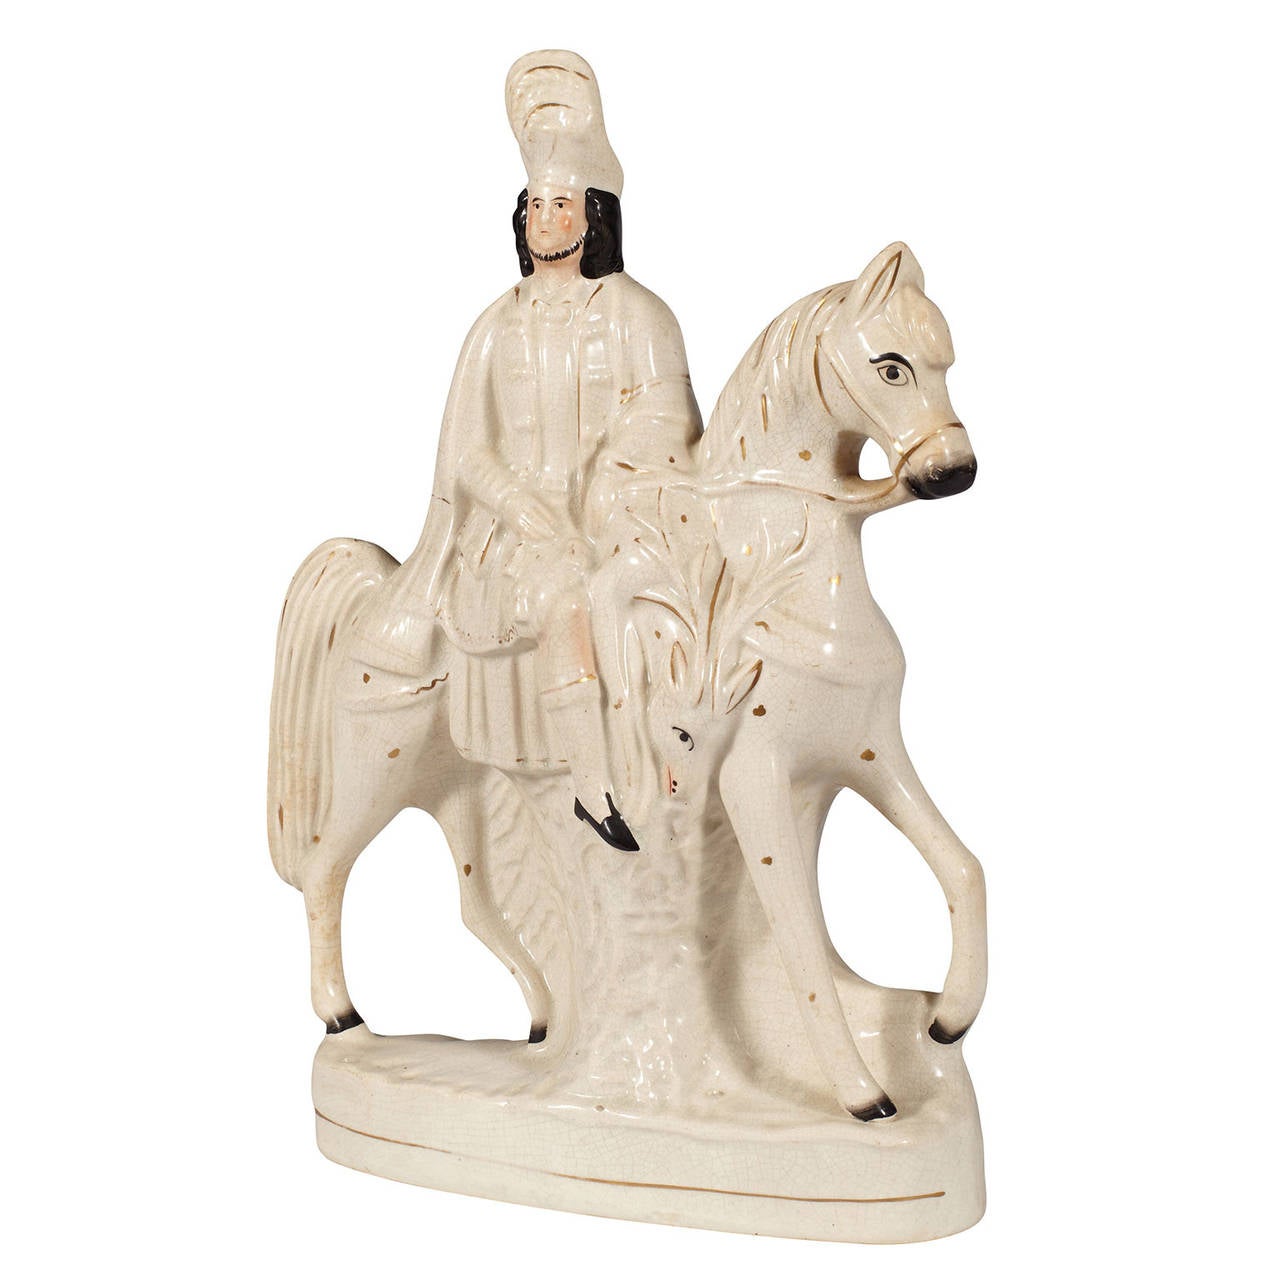 Antique Victorian Staffordshire White Porcelain Figurine of a man on a horse.